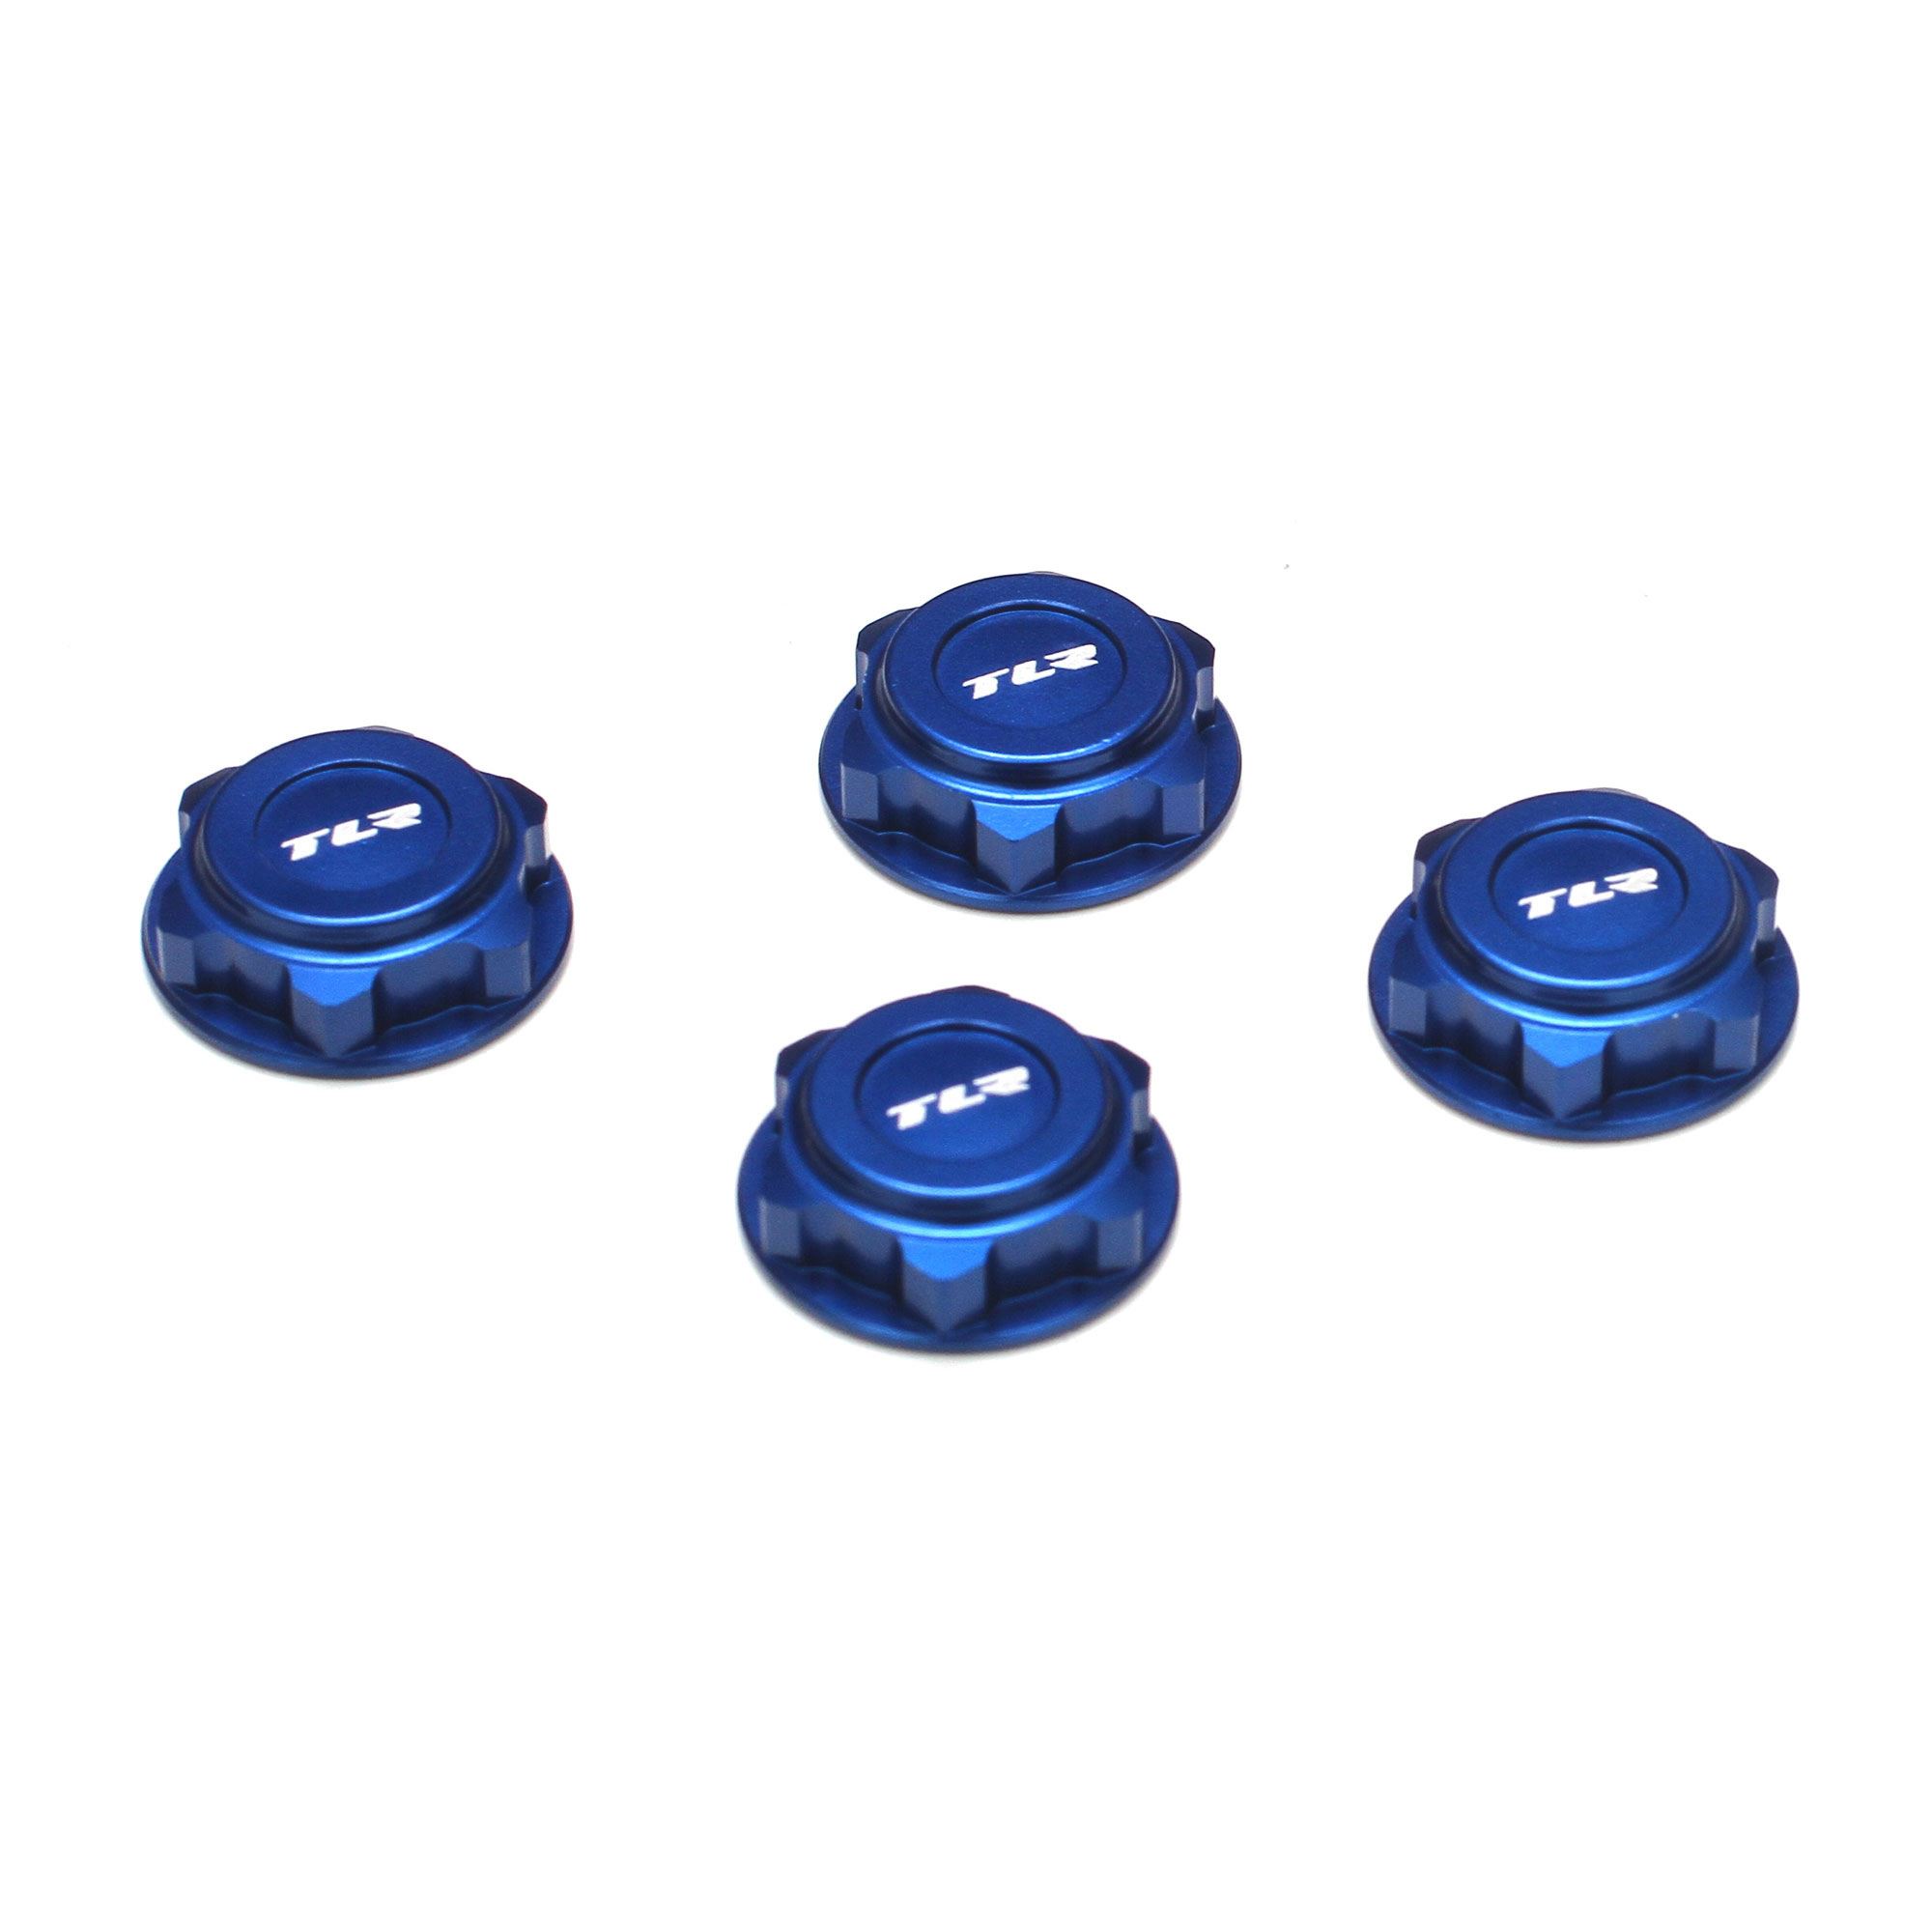 TLR3538 Team Losi Racing Aluminum Covered 17mm Wheel Nuts 4 Hard Anodized